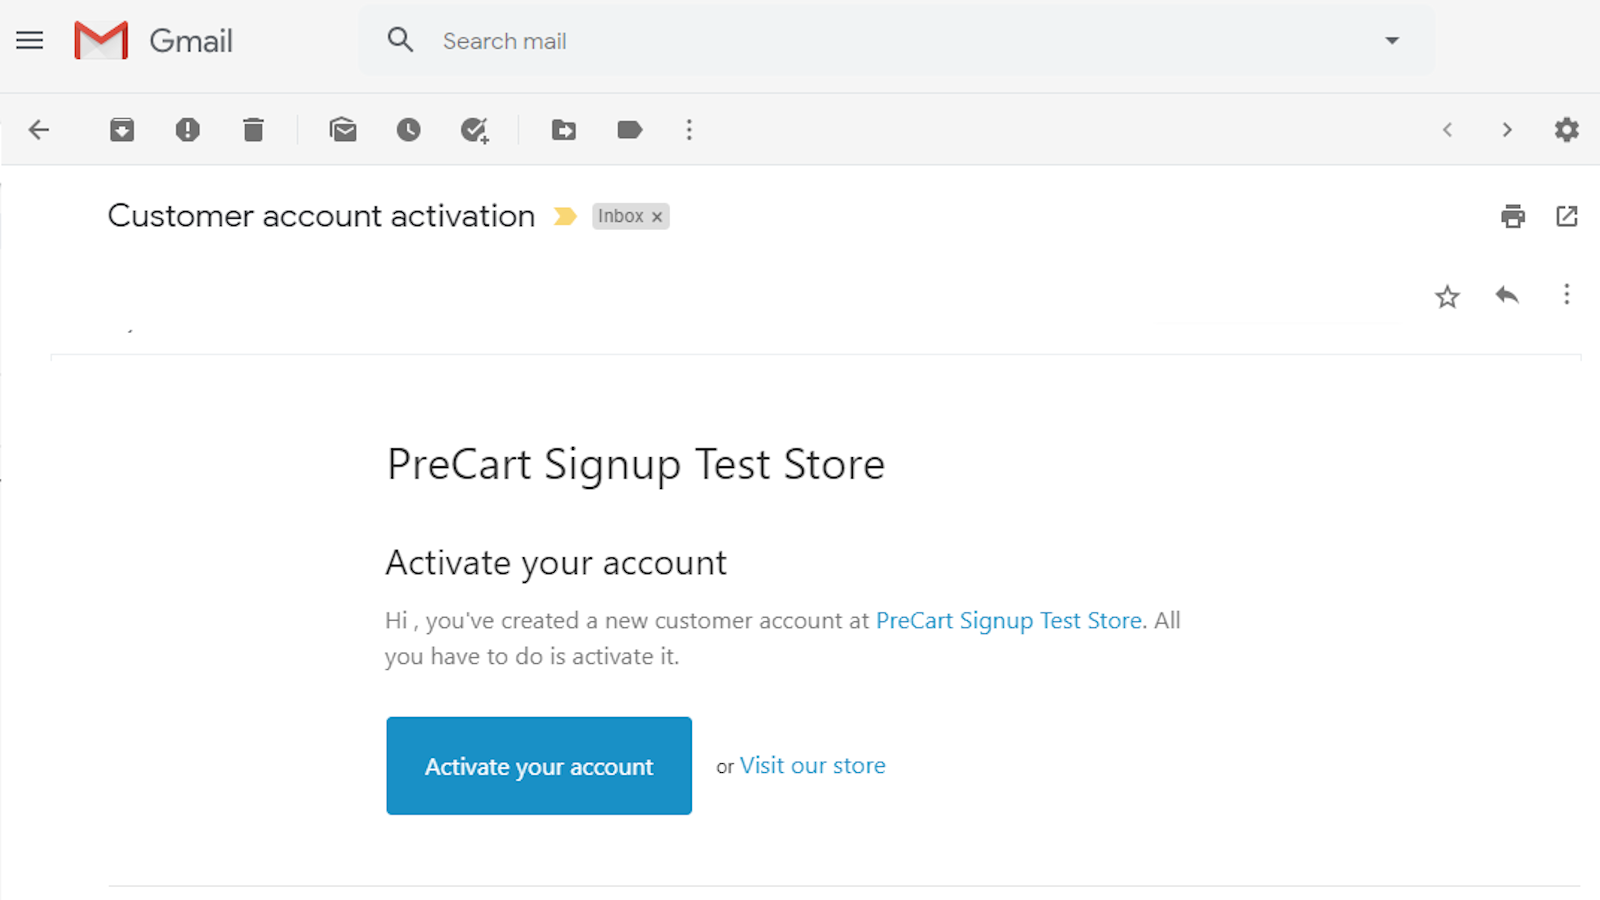 Email is sent to customer to activate their new customer account